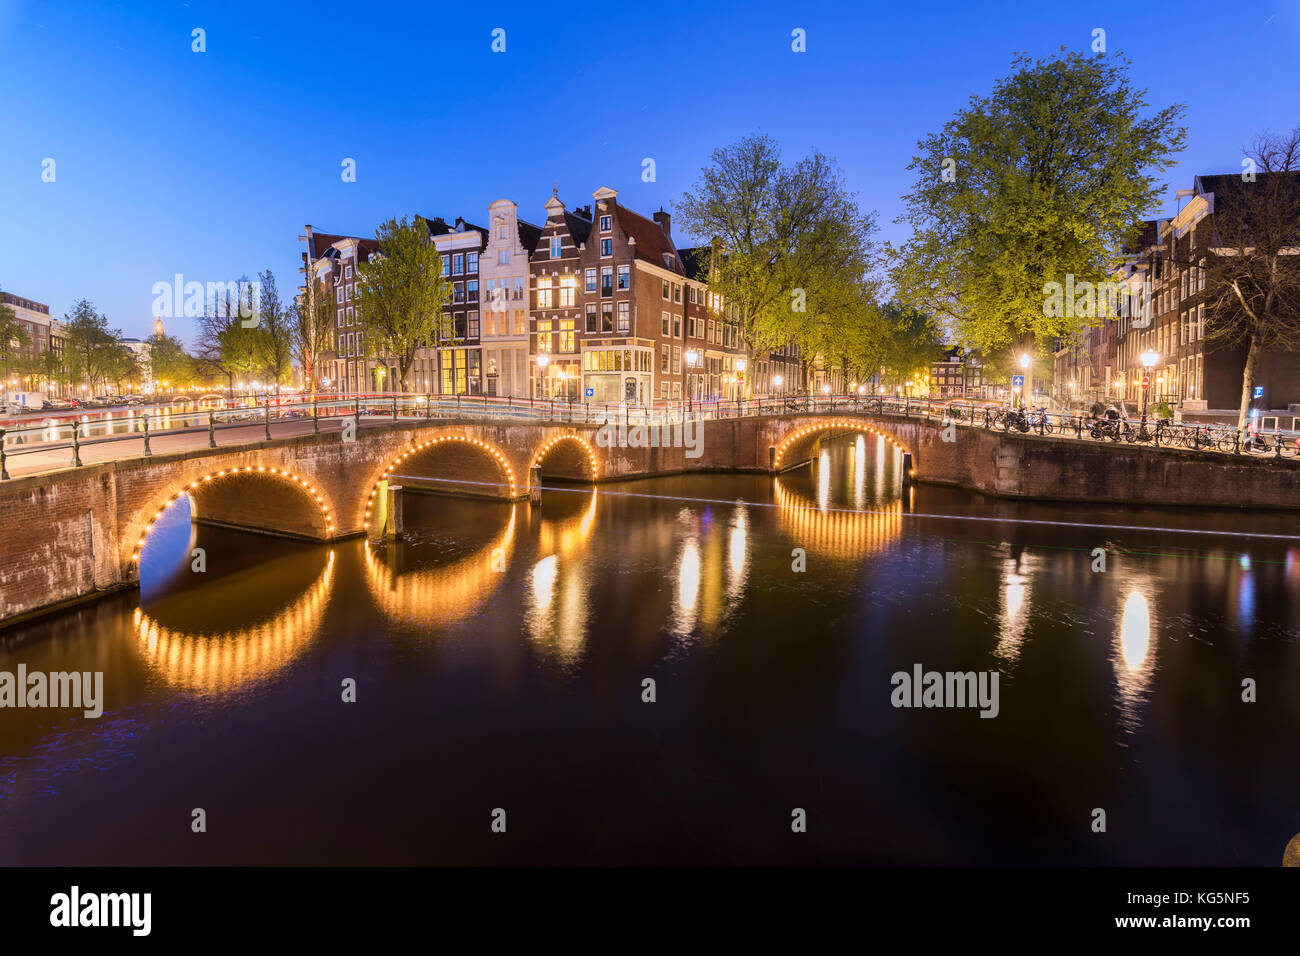 Dusk lights on the typical buildings and bridges reflected in a typical canal Amsterdam Holland The Netherlands Europe Stock Photo